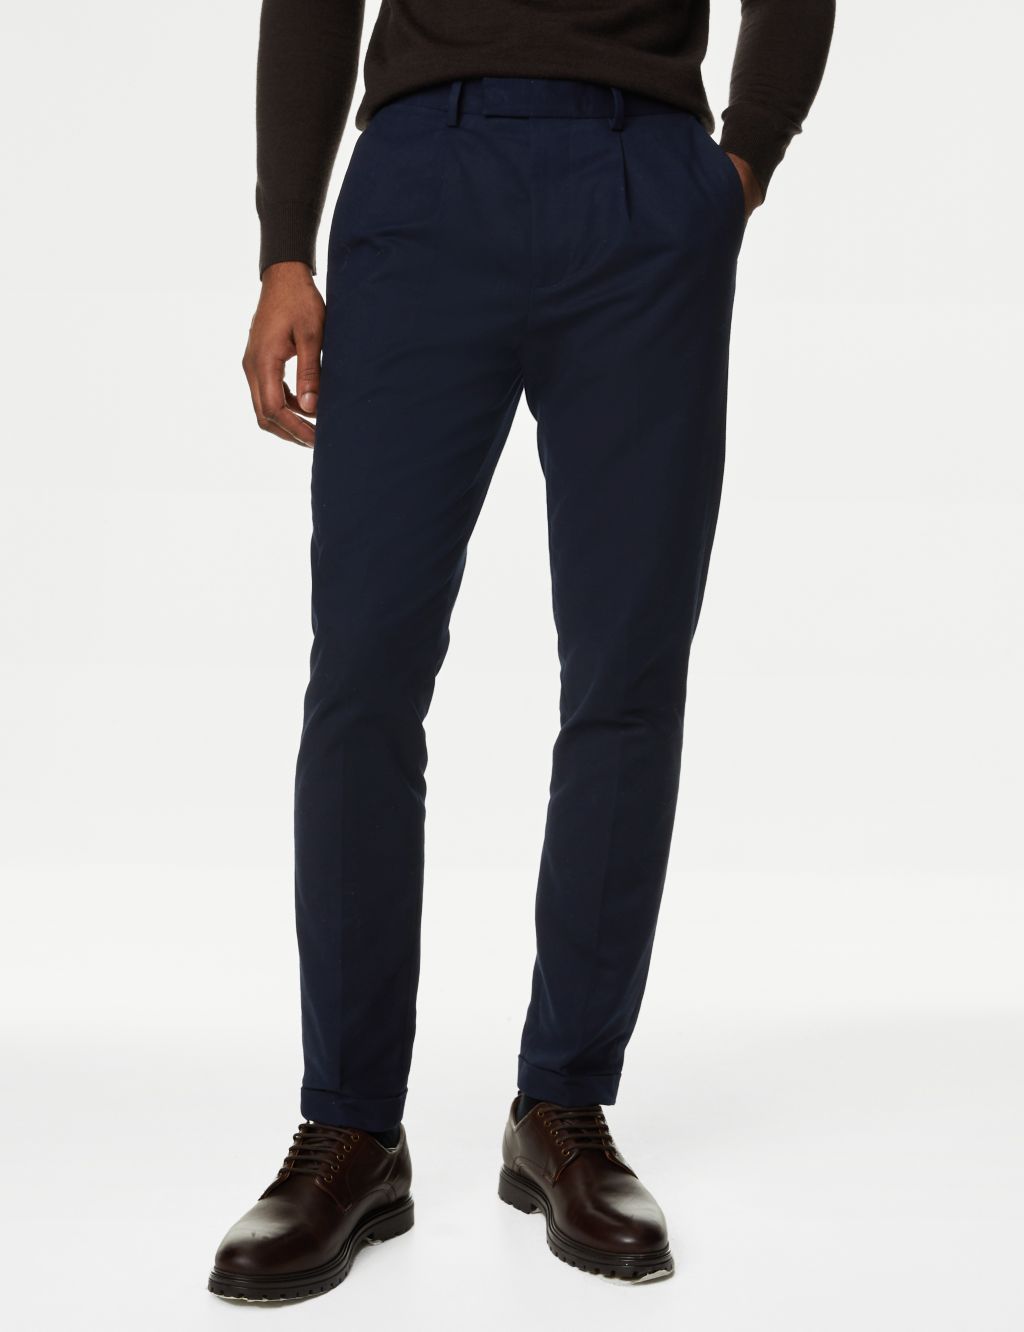 Tapered Fit Smart Stretch Chinos image 1